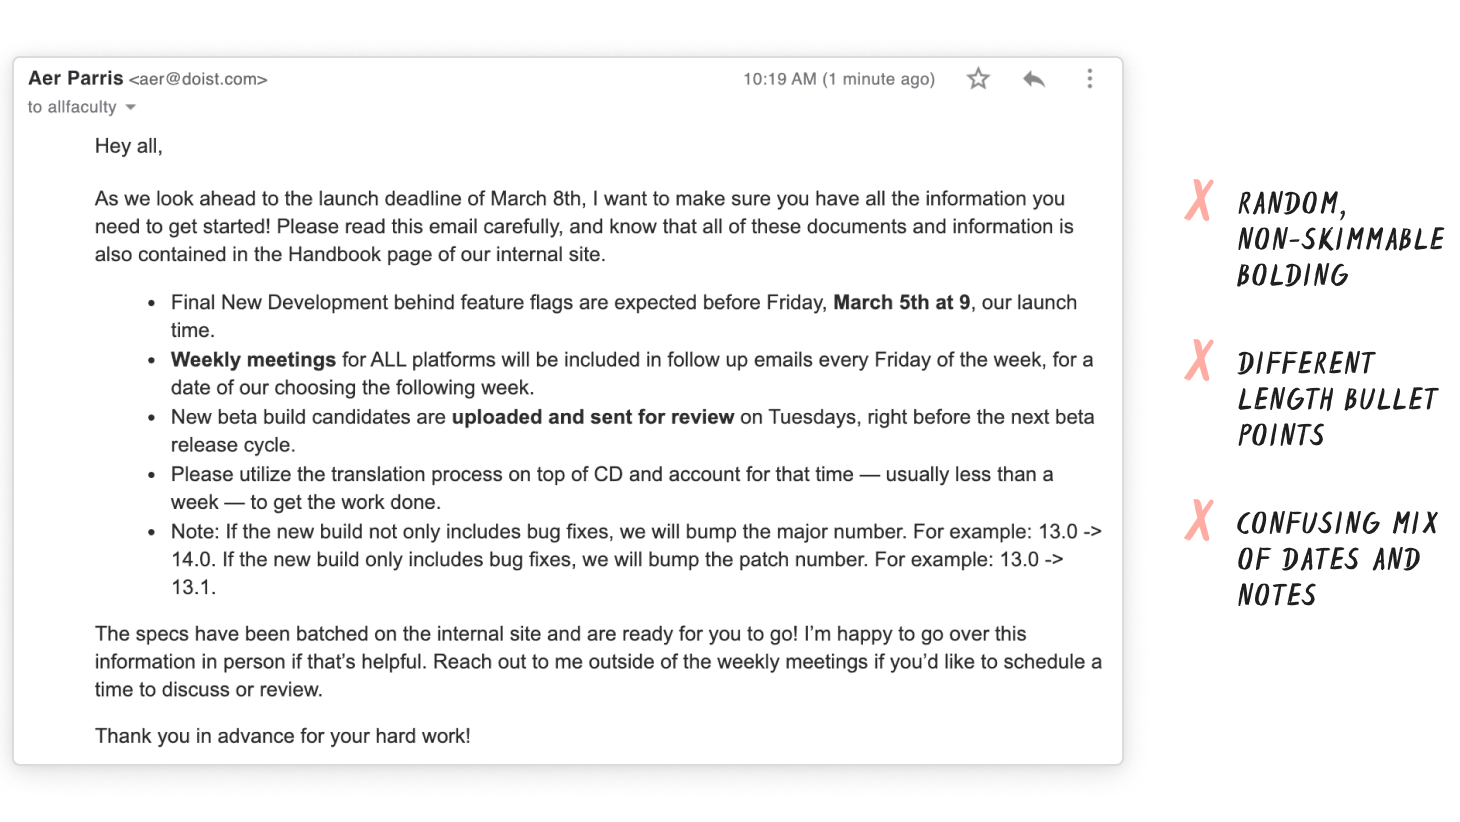 This email example features random, non-skimmable bolding, different-length bullet points, and a confusing mix of dates and notes.